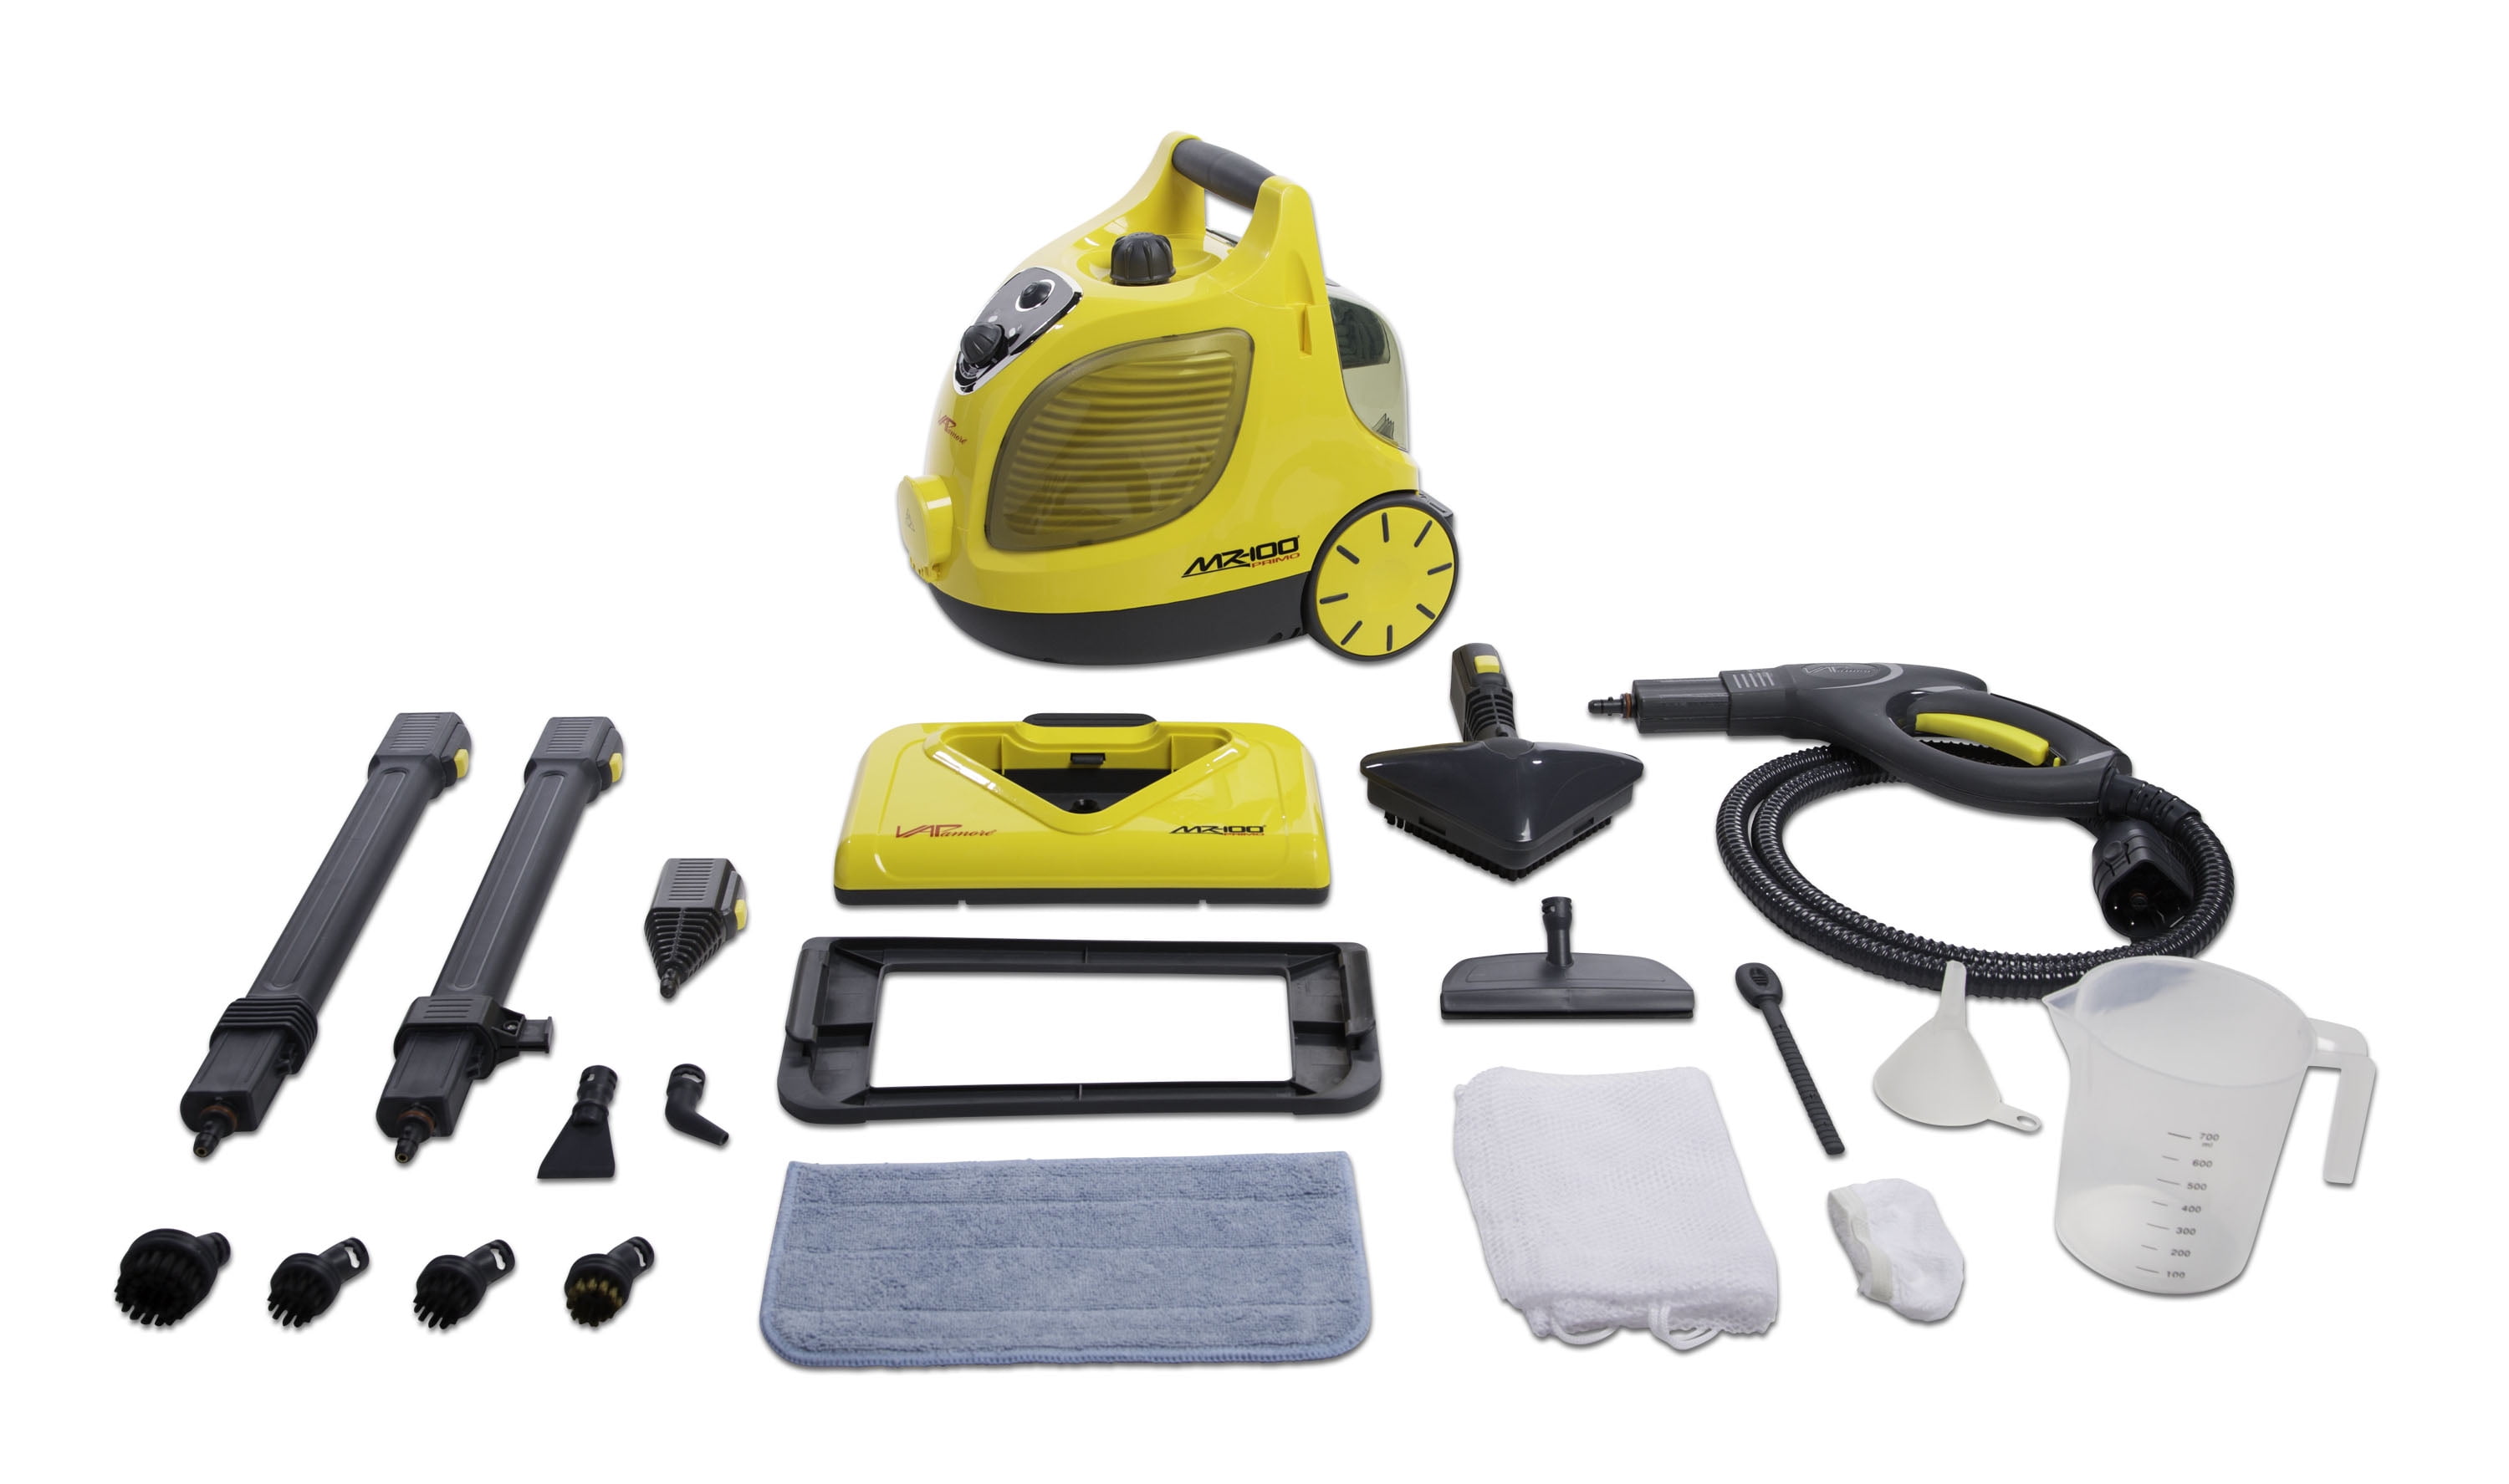 Vapamore MR-100 Primo SteamerSteam Cleaner SystemAuto or Home 